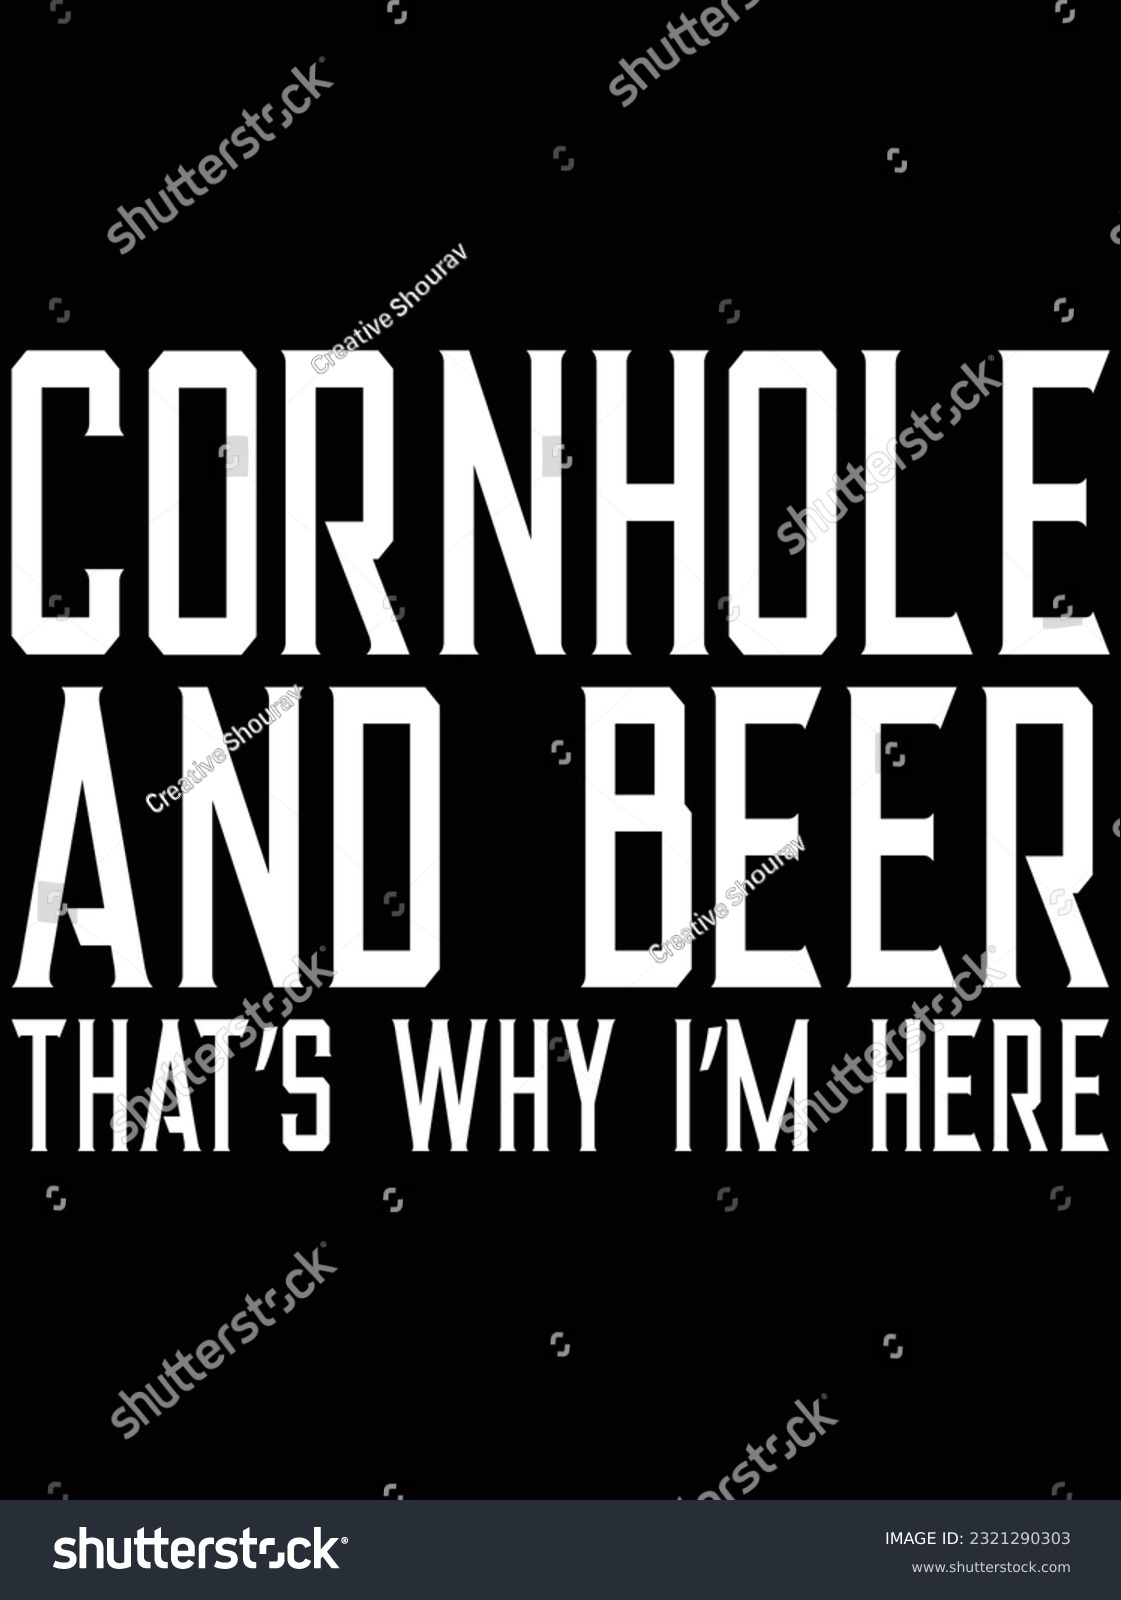 SVG of Cornhole and beer that's why I'm here vector art design, eps file. design file for t-shirt. SVG, EPS cuttable design file svg